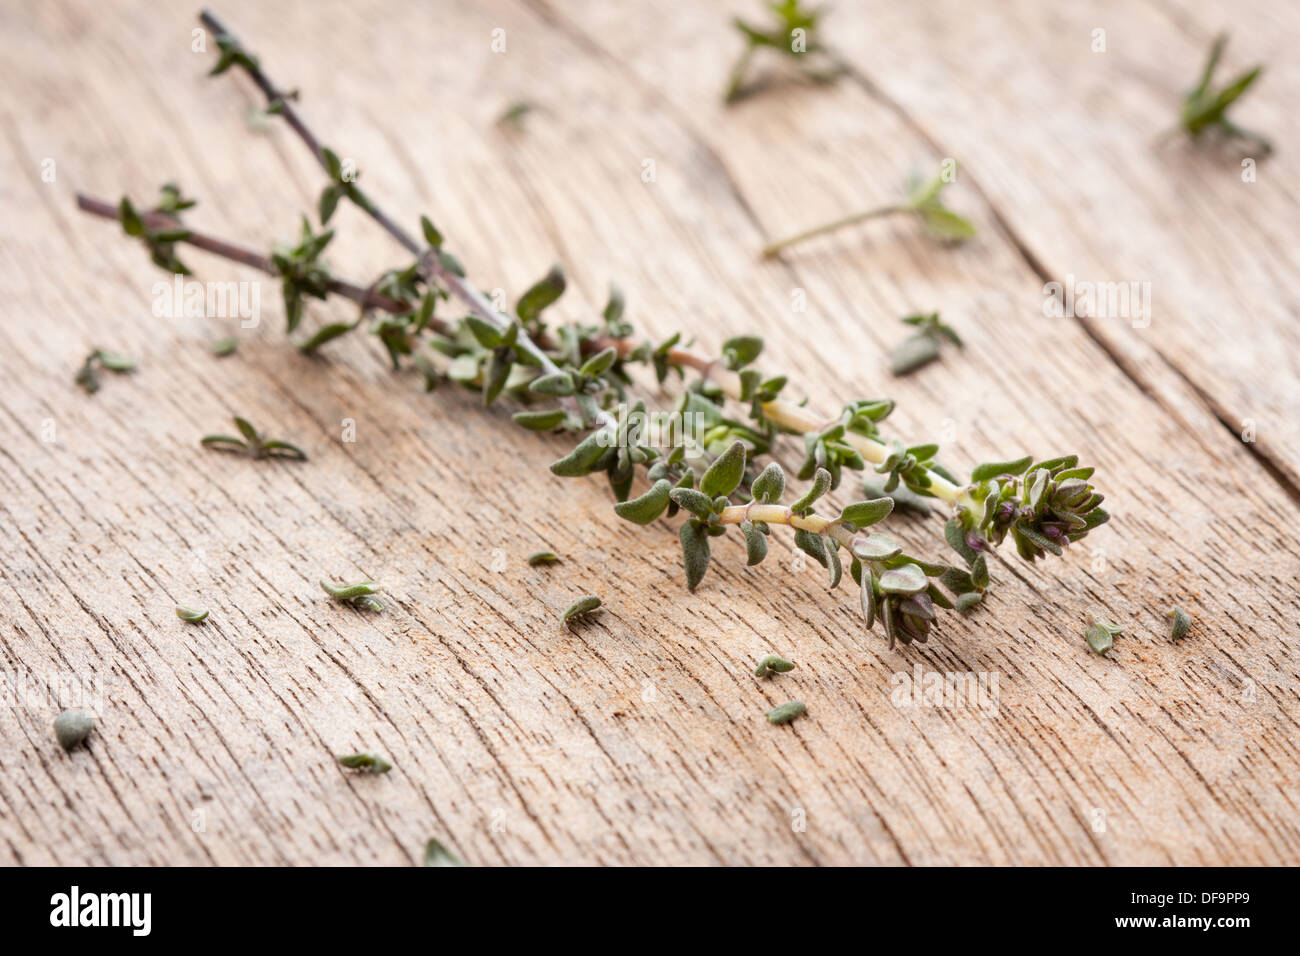 Two thyme sprigs over wooden table close-up Stock Photo